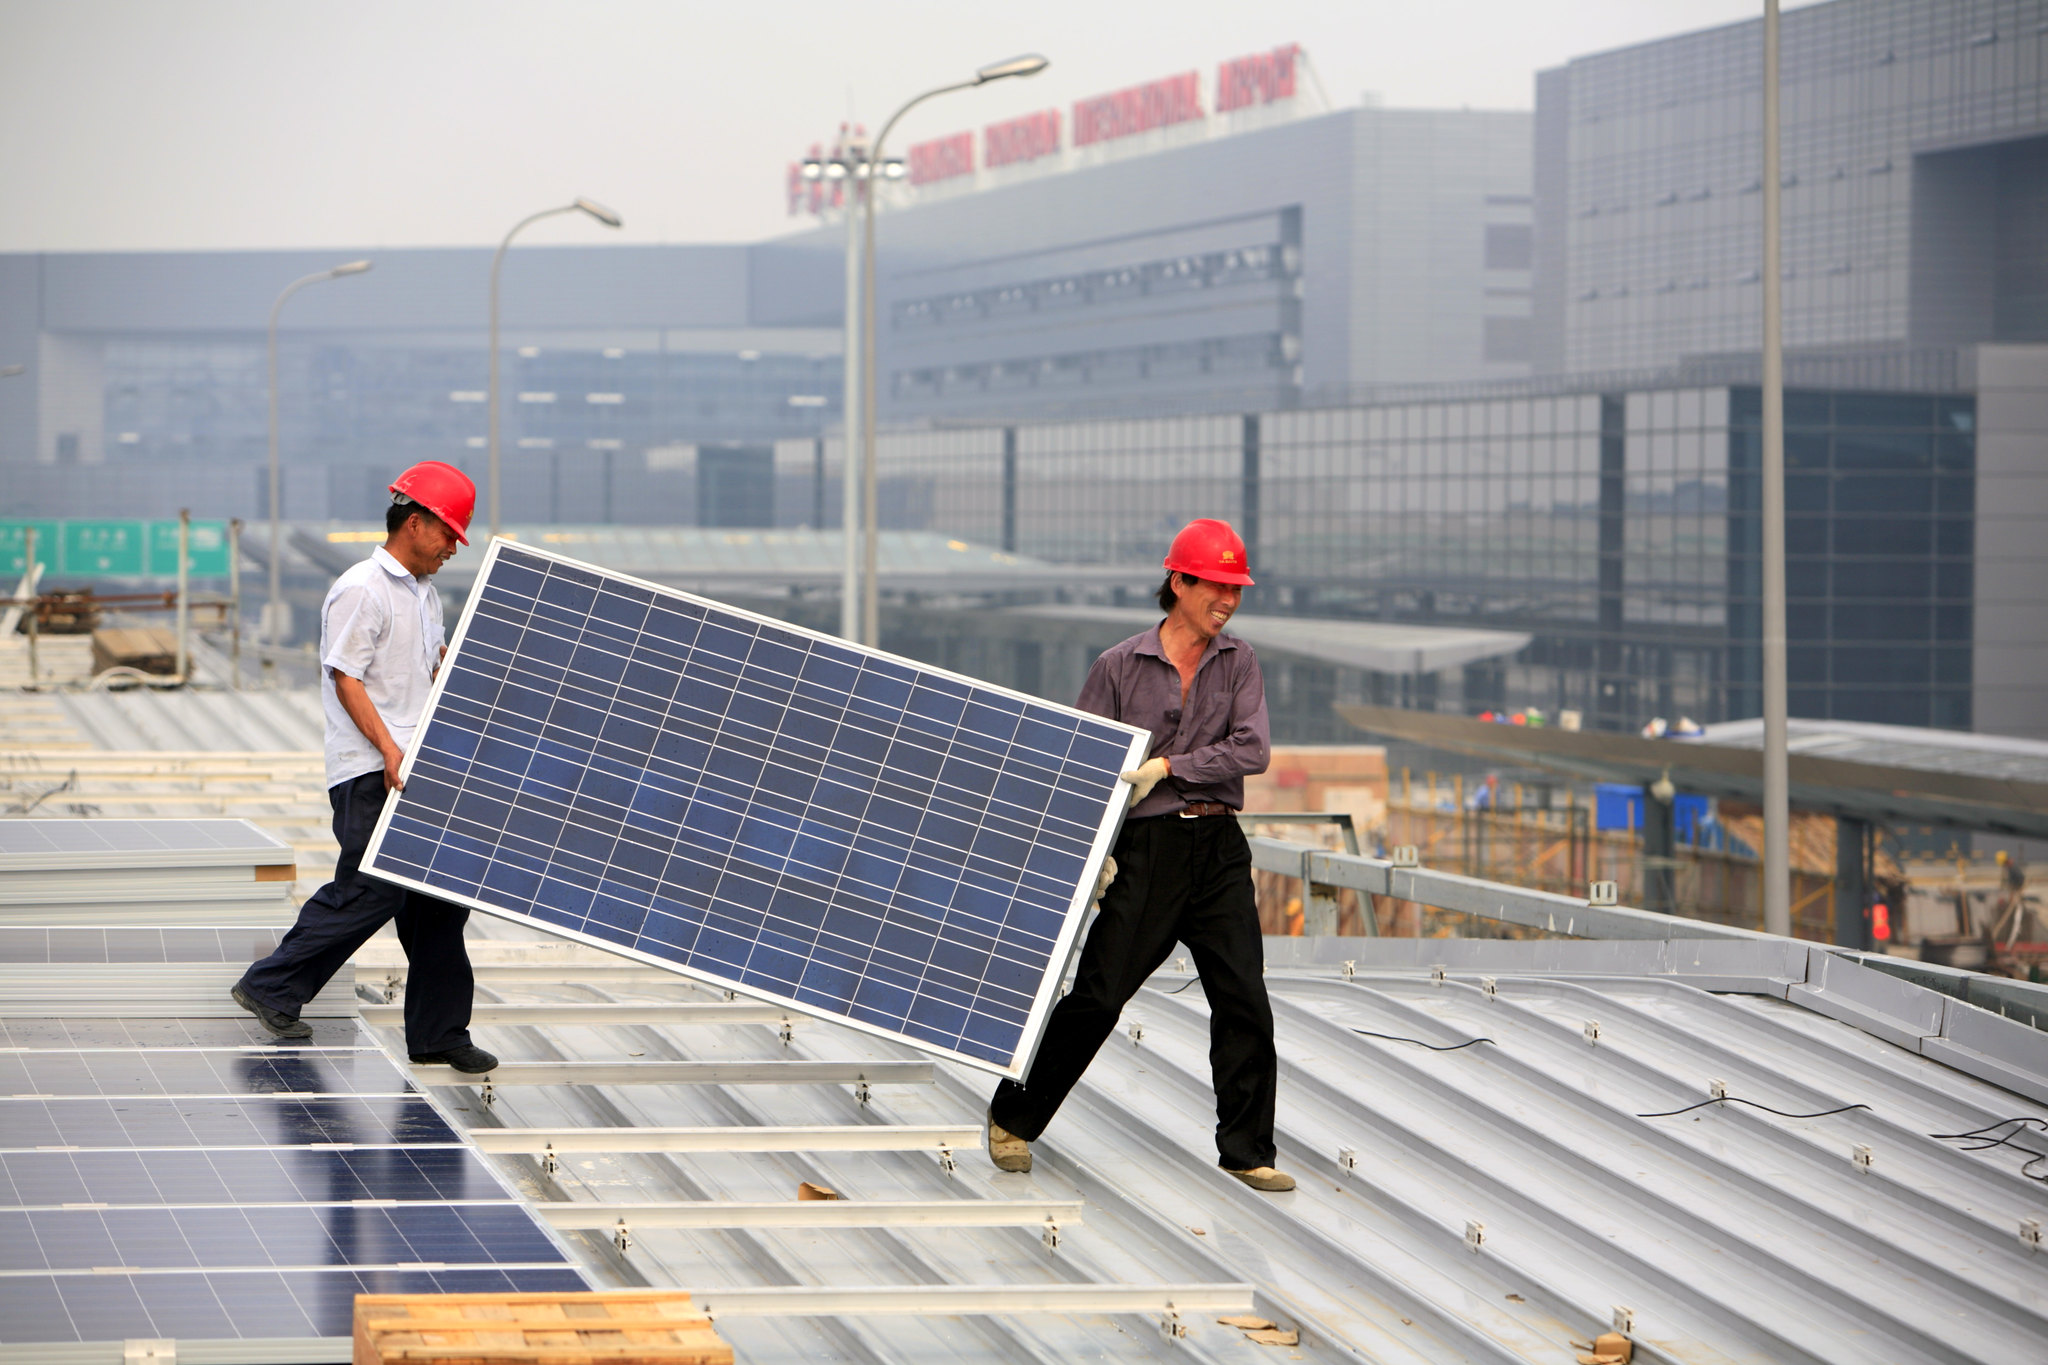 solar panel china Image Climate Group Flickr